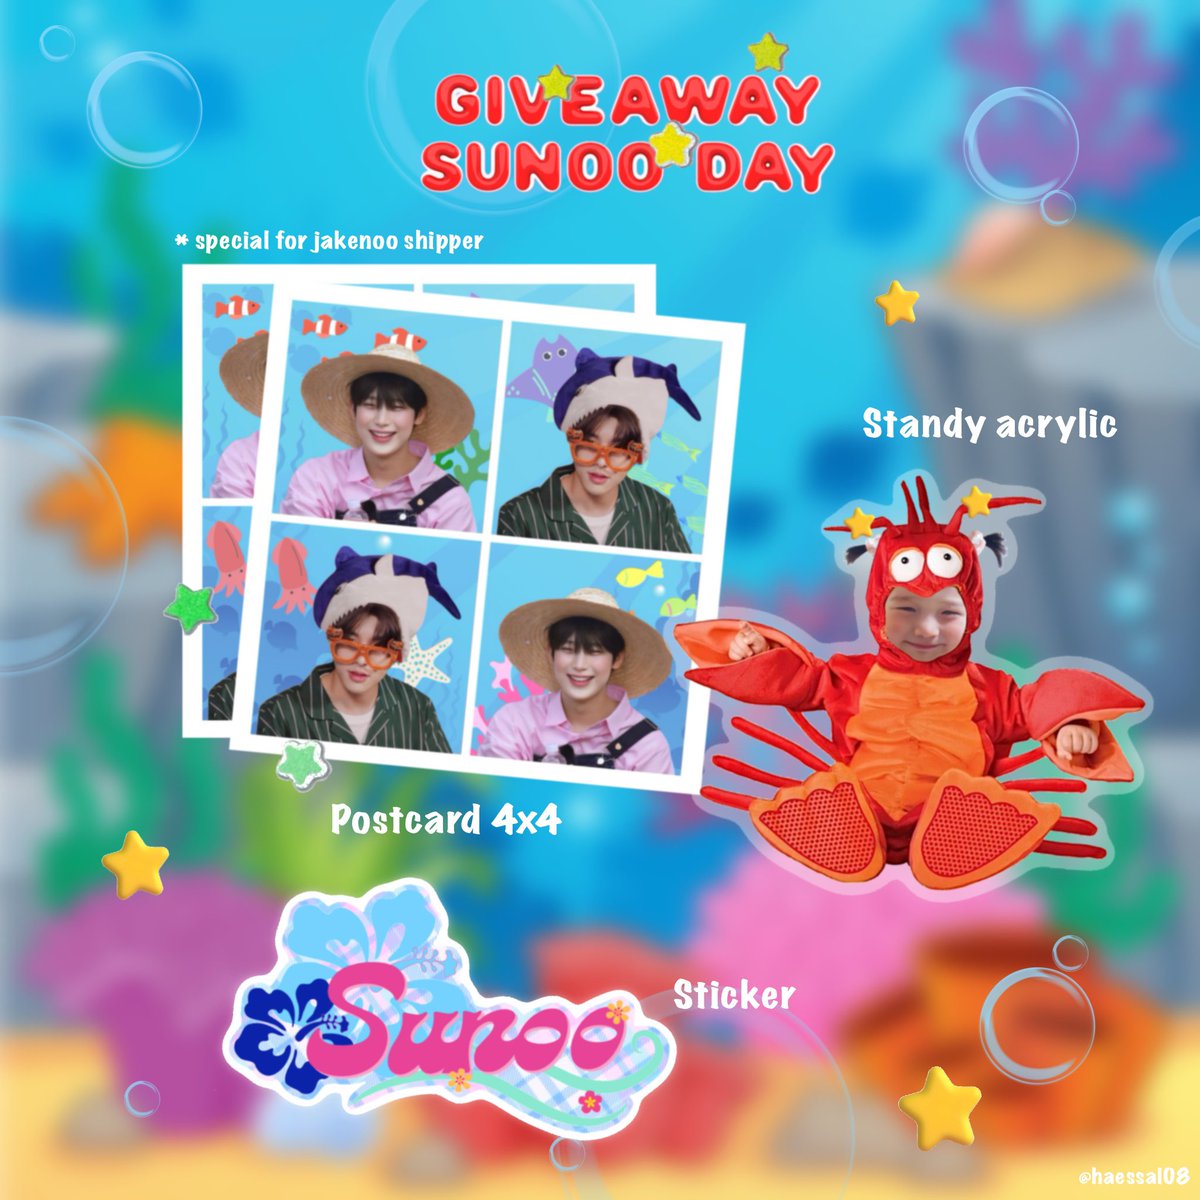 ✿ Giveaway Sunoo Day 🐠🦀

🎣 25 set ♬.*ﾟ
• standy acrylic 1ea
• sticker 1ea

˖ ࣪⊹ postcard jakenoo only 15 ea ˖ ࣪⊹

date :  22 june 2024
location & time : tba

rt & show this tw
 #HAPPYSUNOODAY